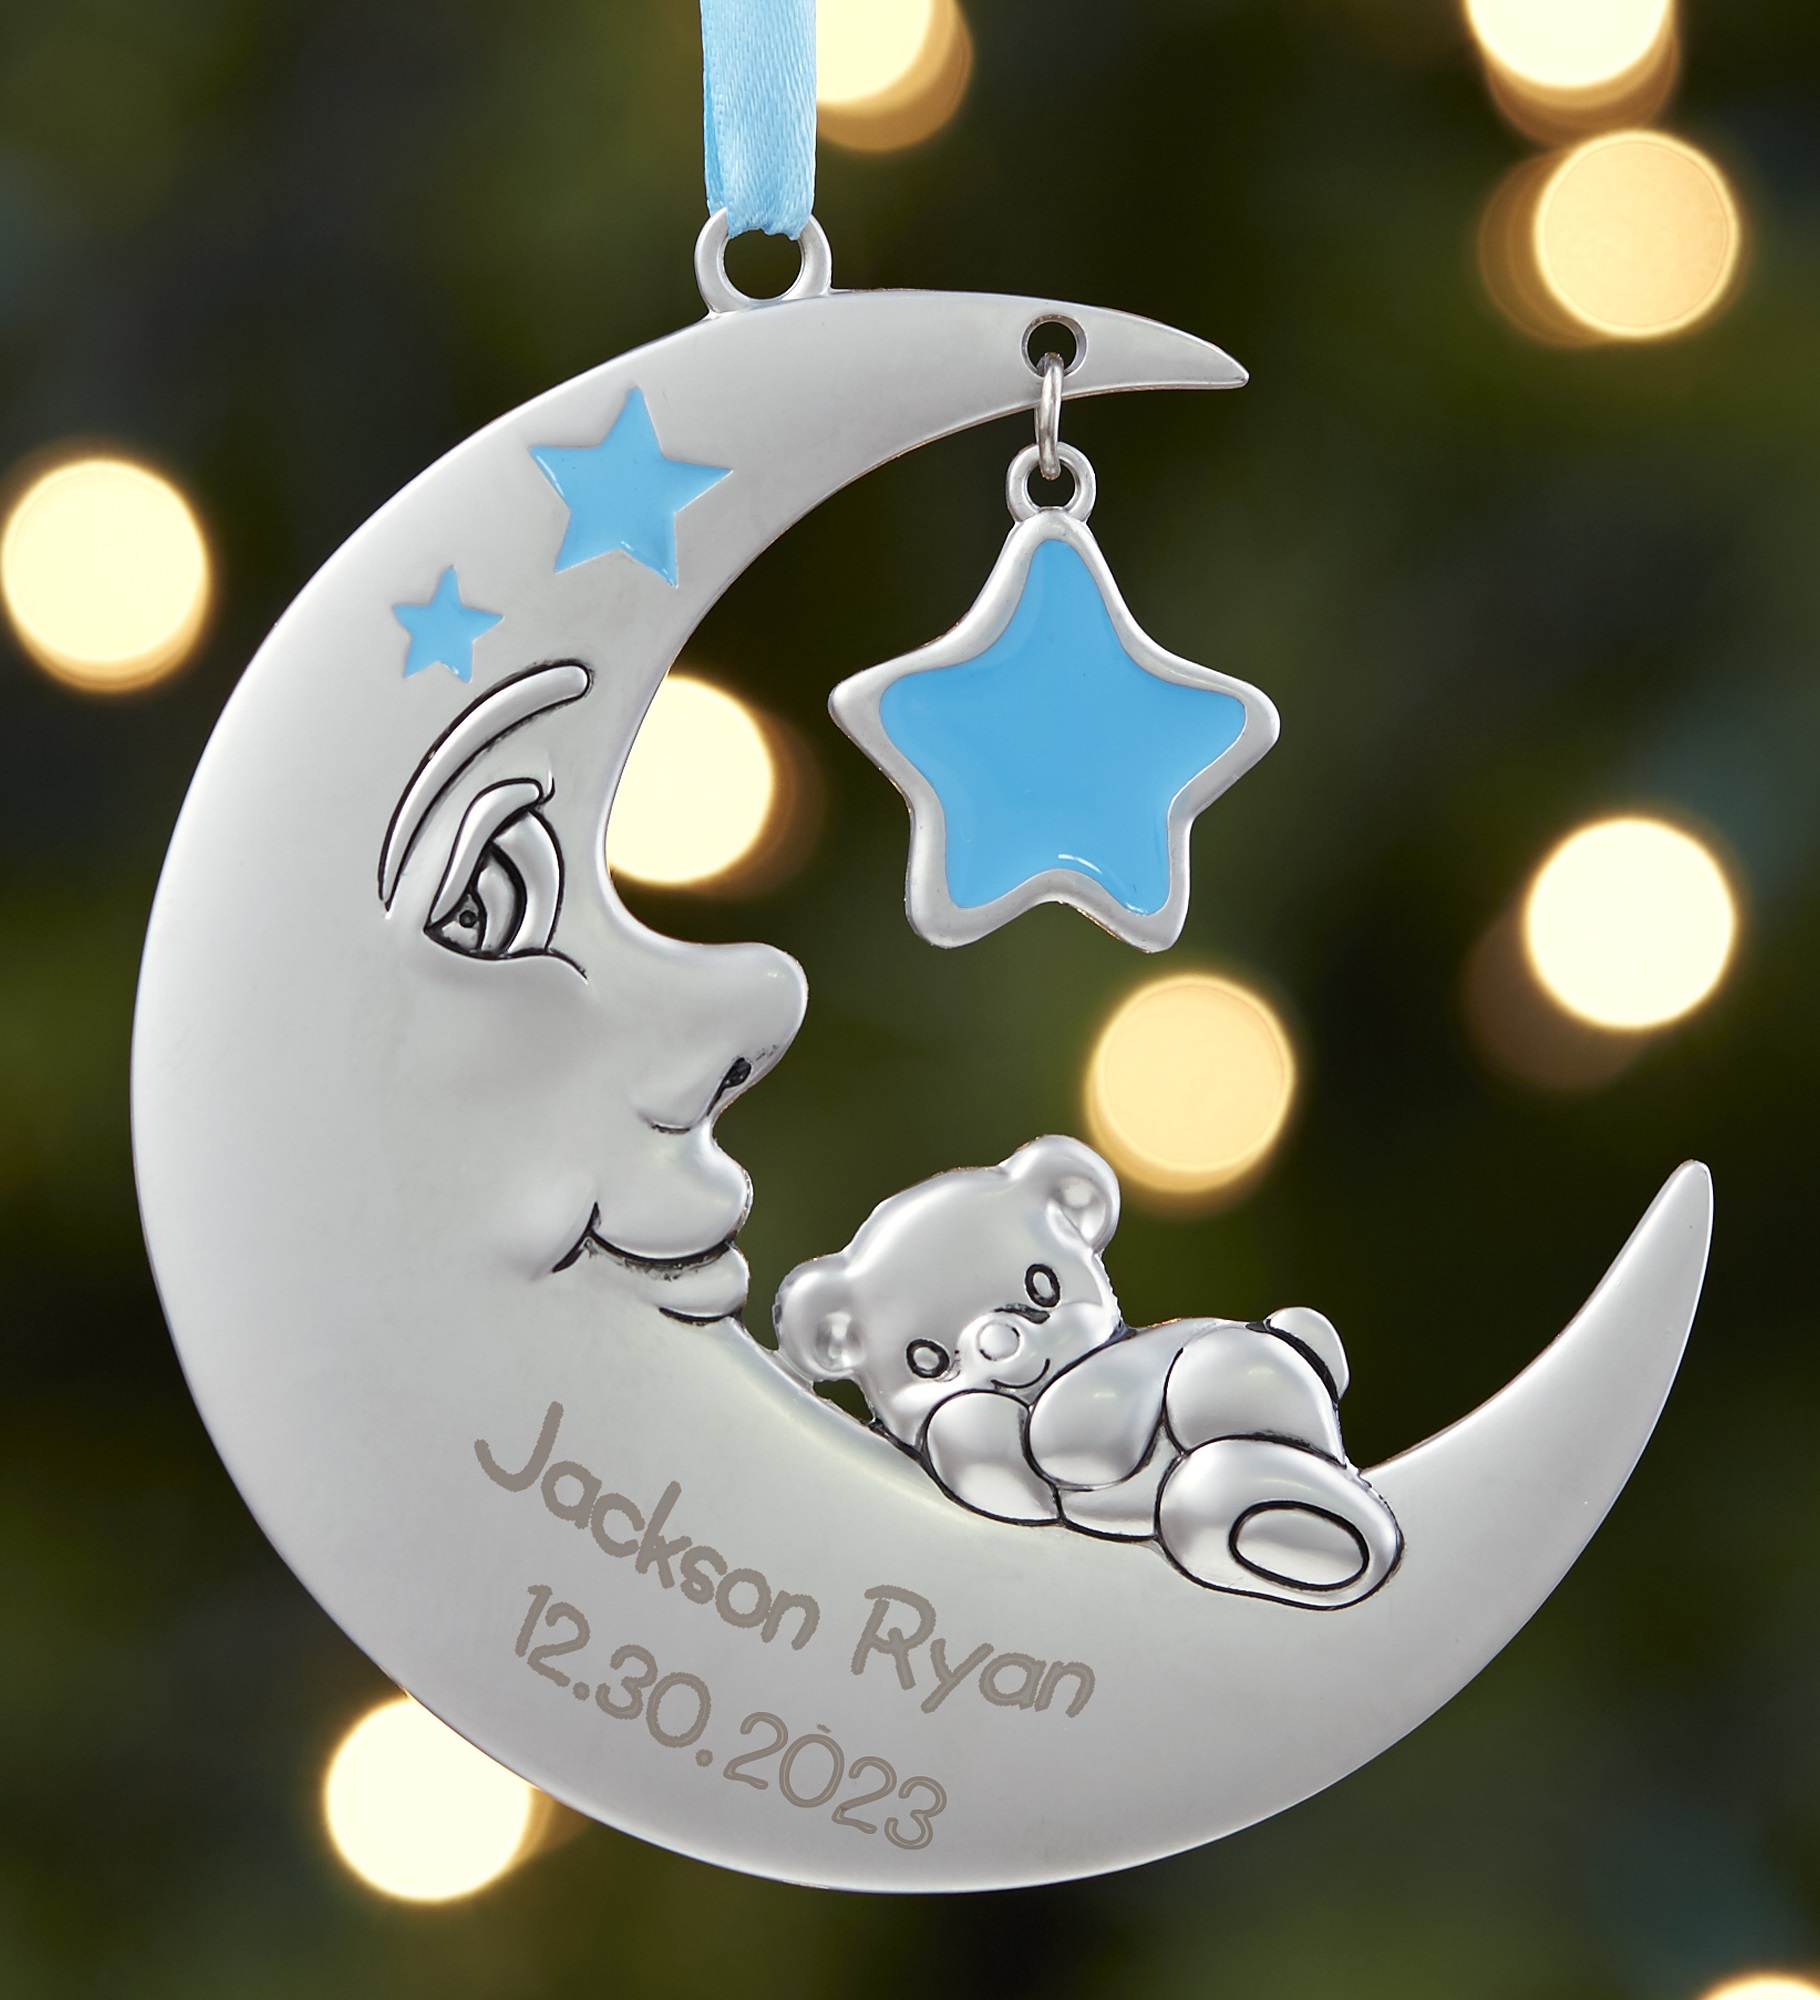 Baby's 1st Christmas Personalized Moon Boy Ornament